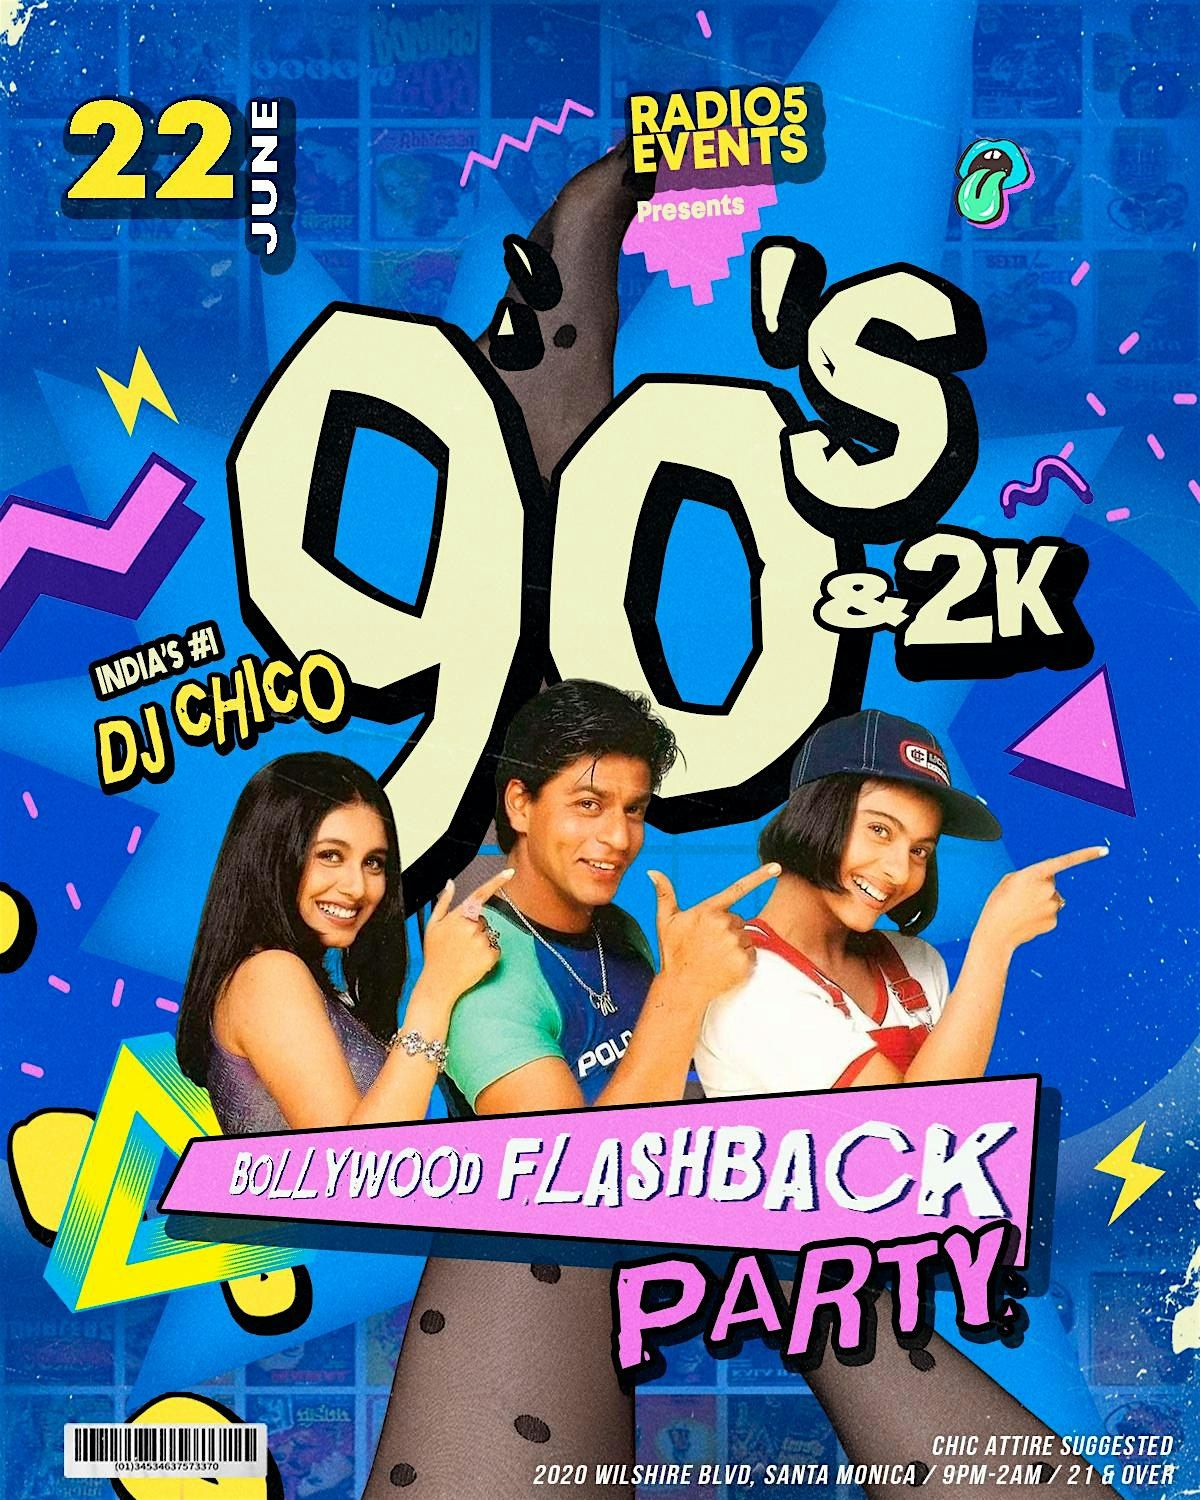 Bollywood Throwback: Back To The 90's & 2k Party with India's #1 DJ CHICO!